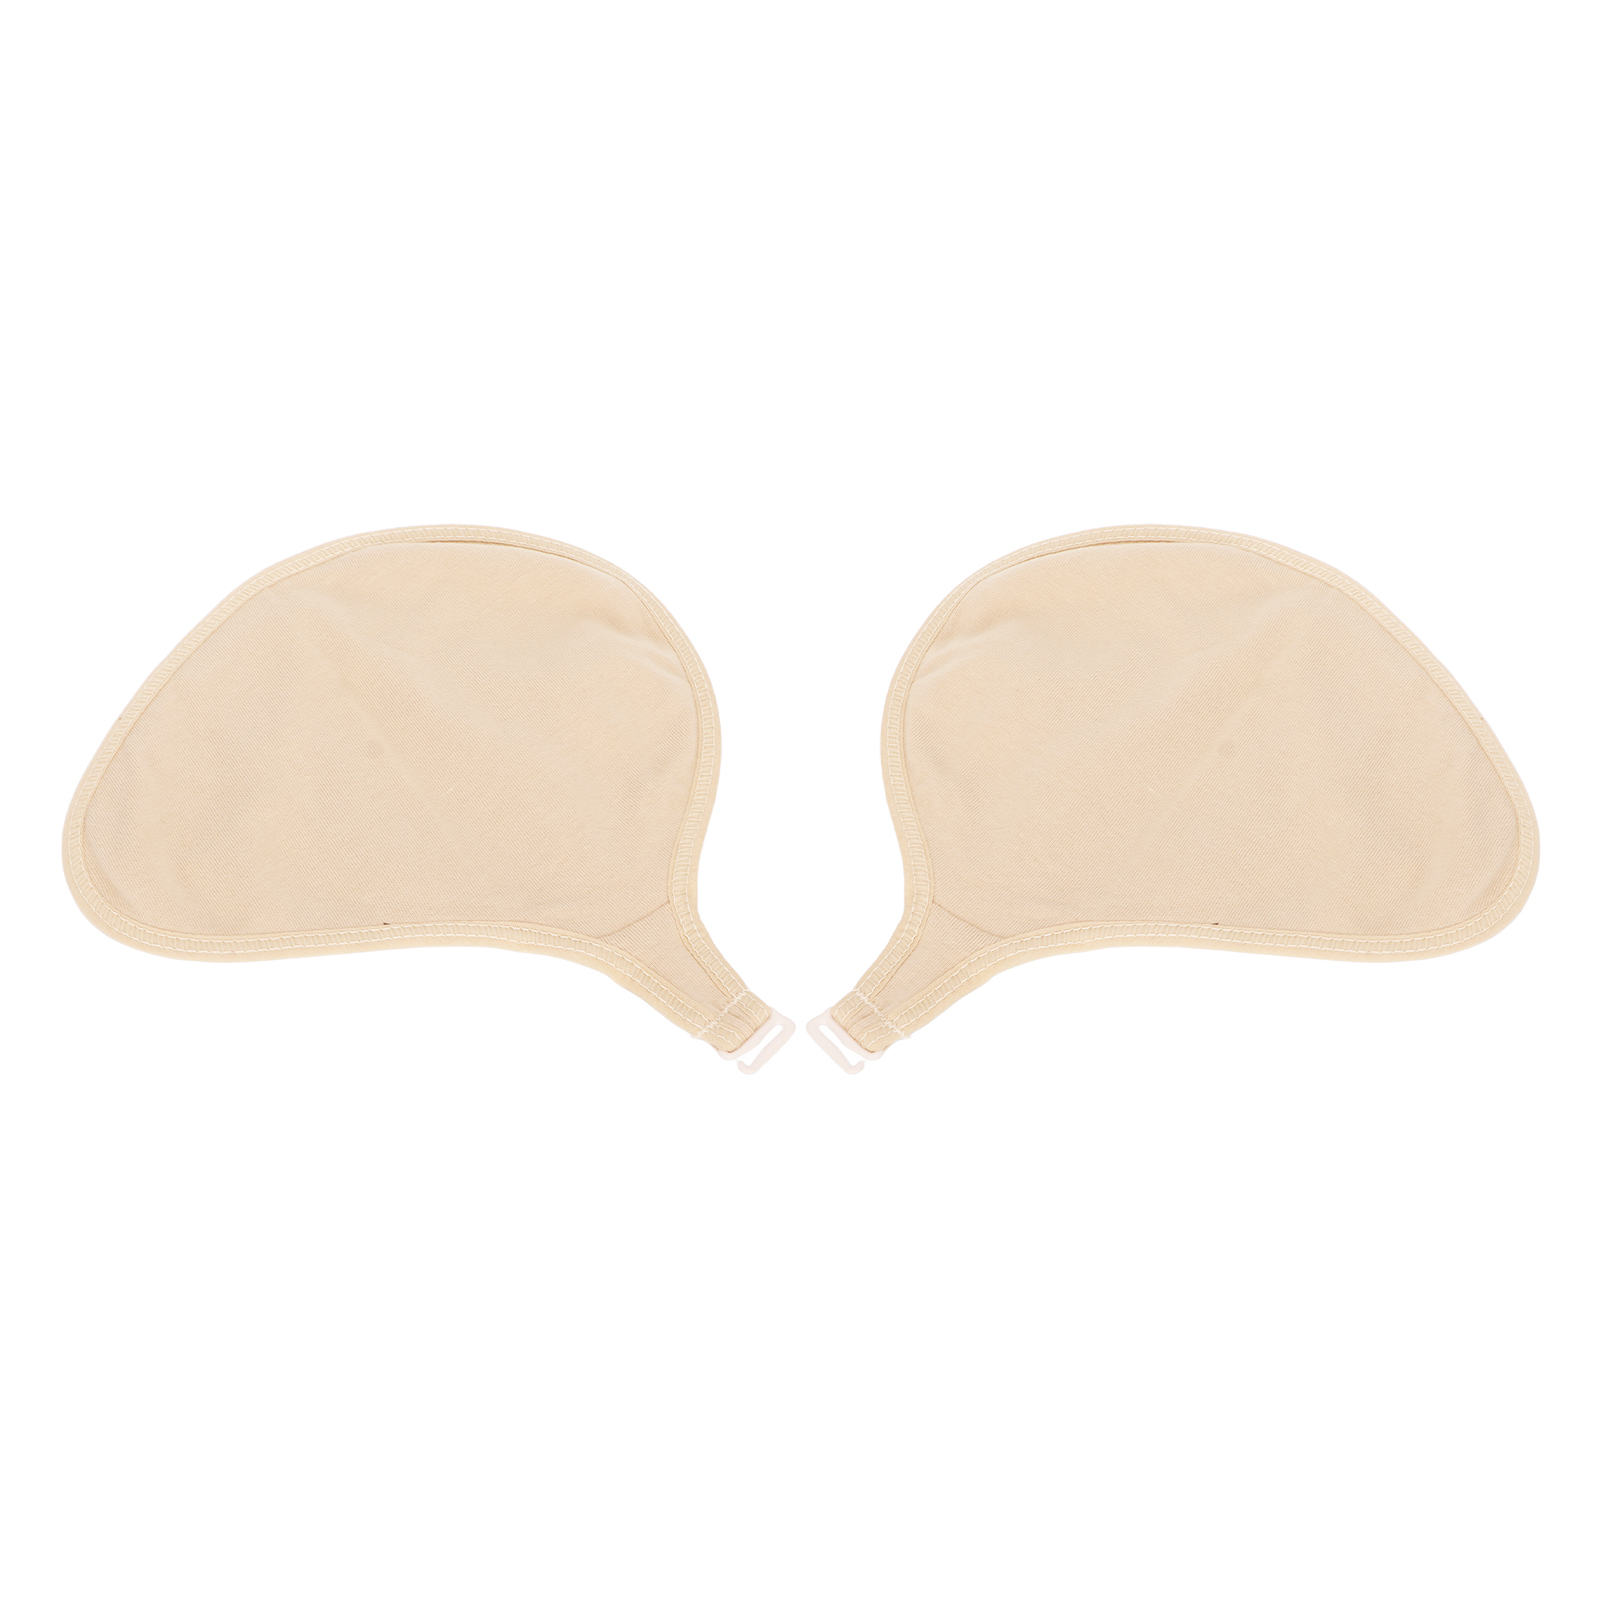 Silicone Breast Forms Protective Cover, Women Soft Cotton Mastectomy  Prosthesis Cover Bag for Mastectomy Prosthesis (Left)